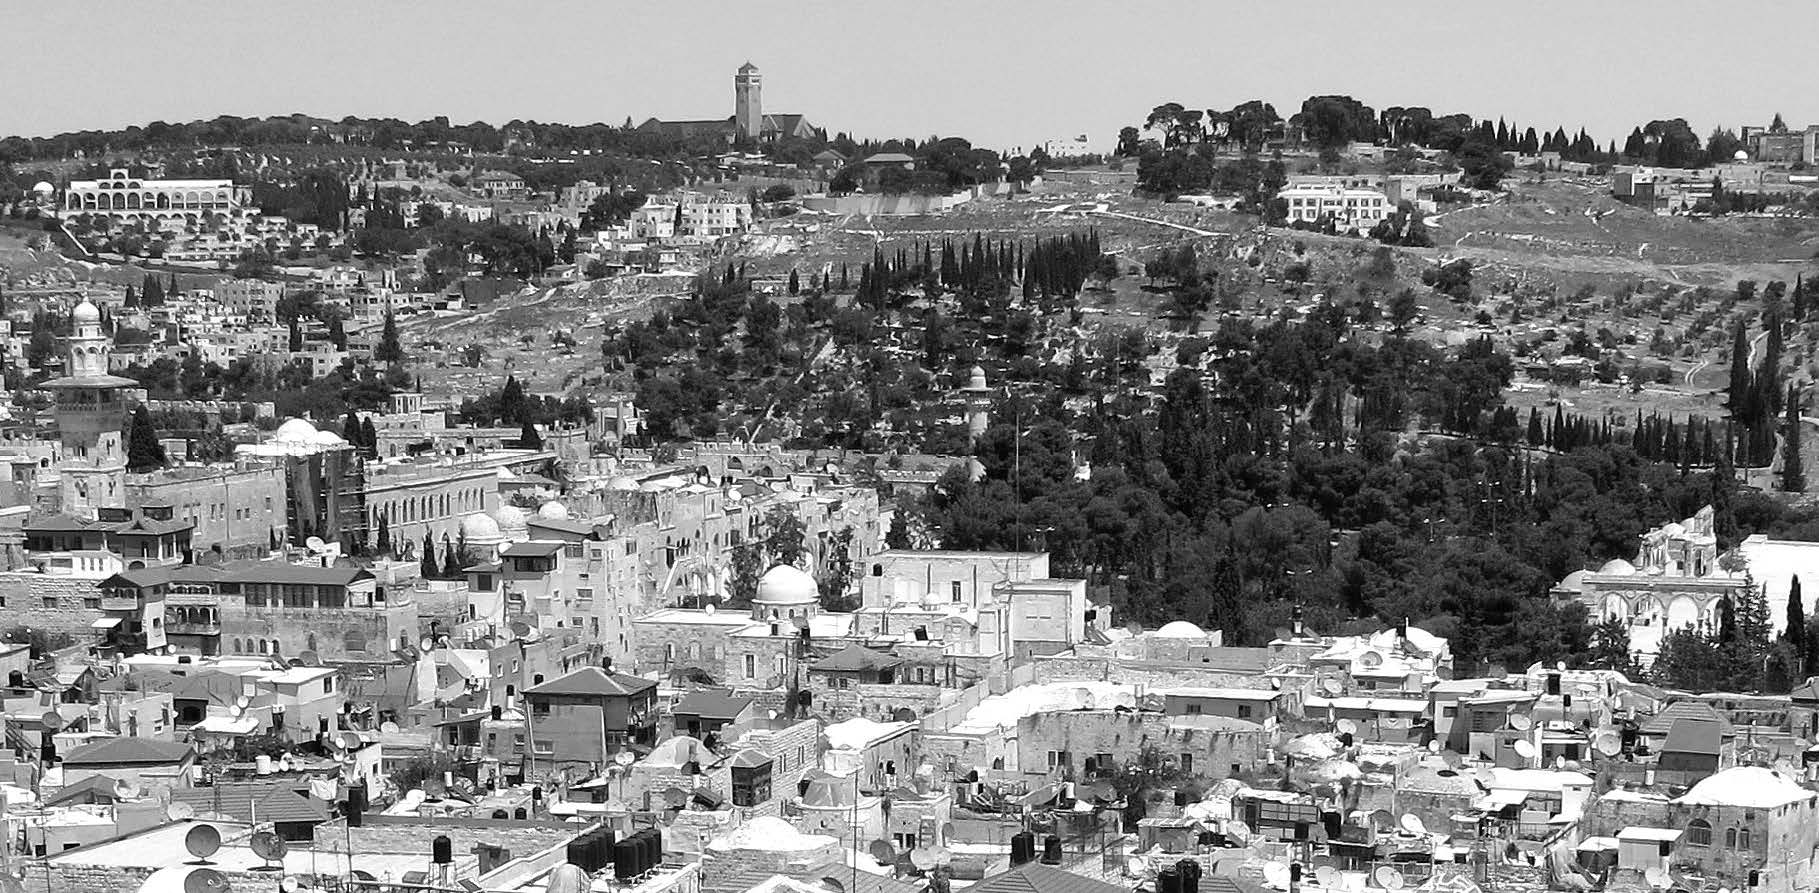 The Mount of Olives in Jerusalem, site of Orson Hyde’s dedication of the Holy Land. On the far left is the BYU Jerusalem Center. Center-right is the Orson Hyde Memorial Garden, which commemorates that dedication.